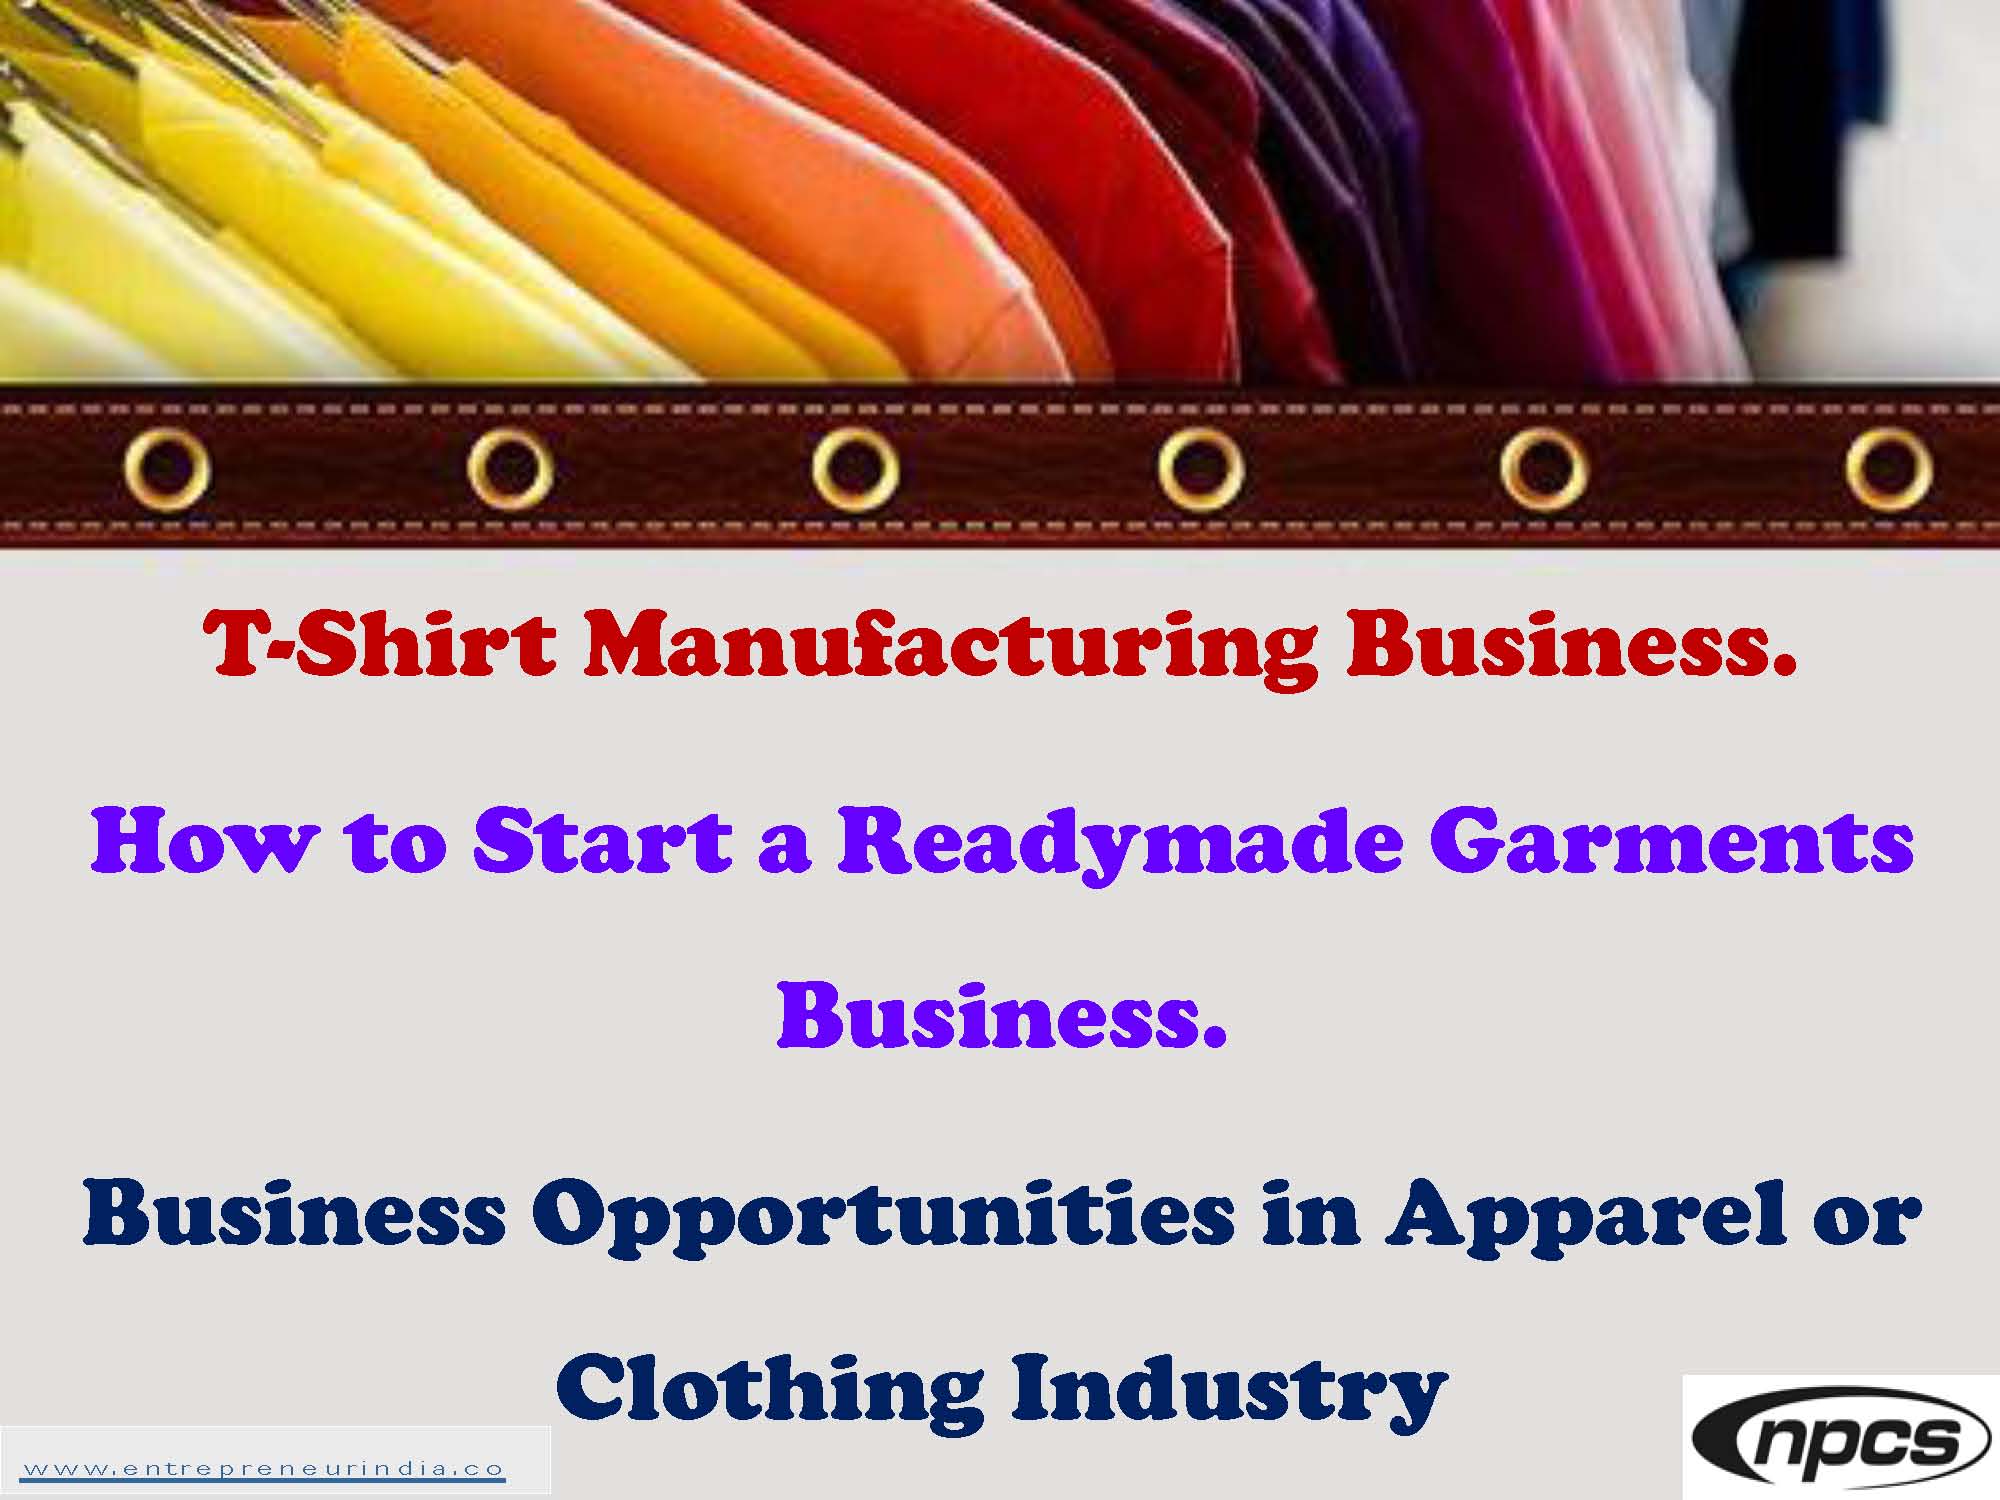 t shirt manufacturing business plan in india